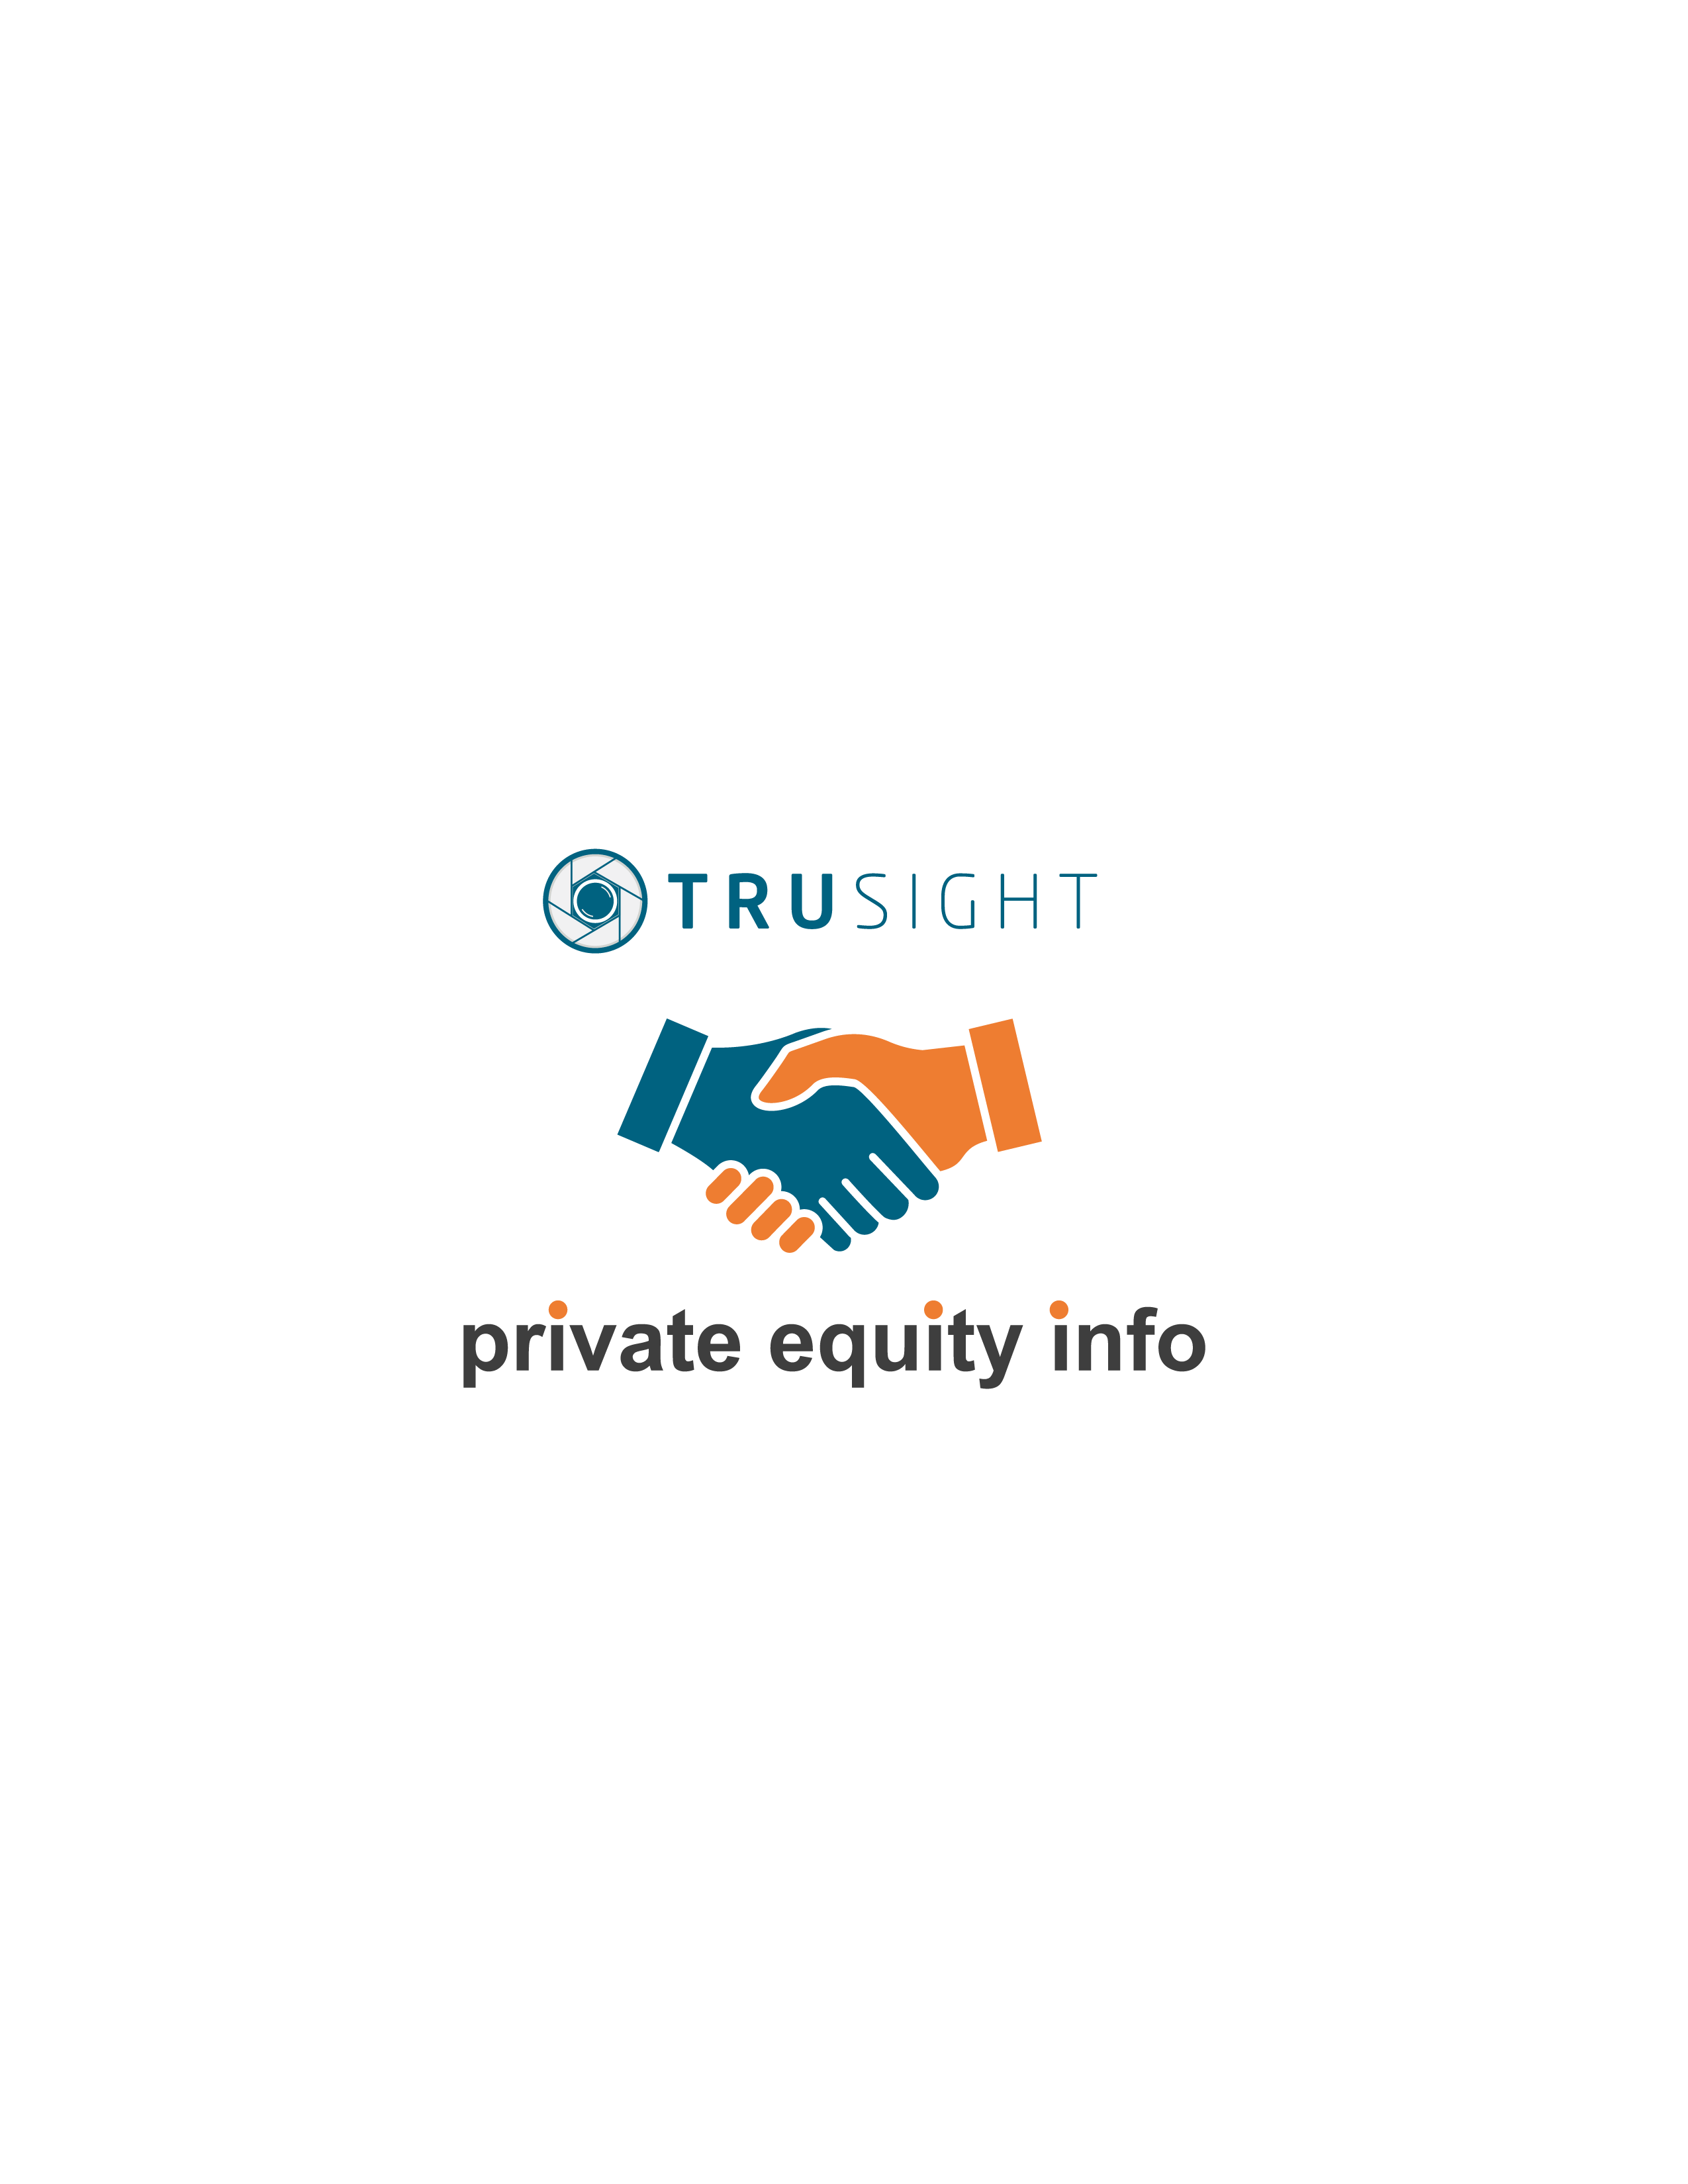 TruSight, LLC Acquires Private Equity Info